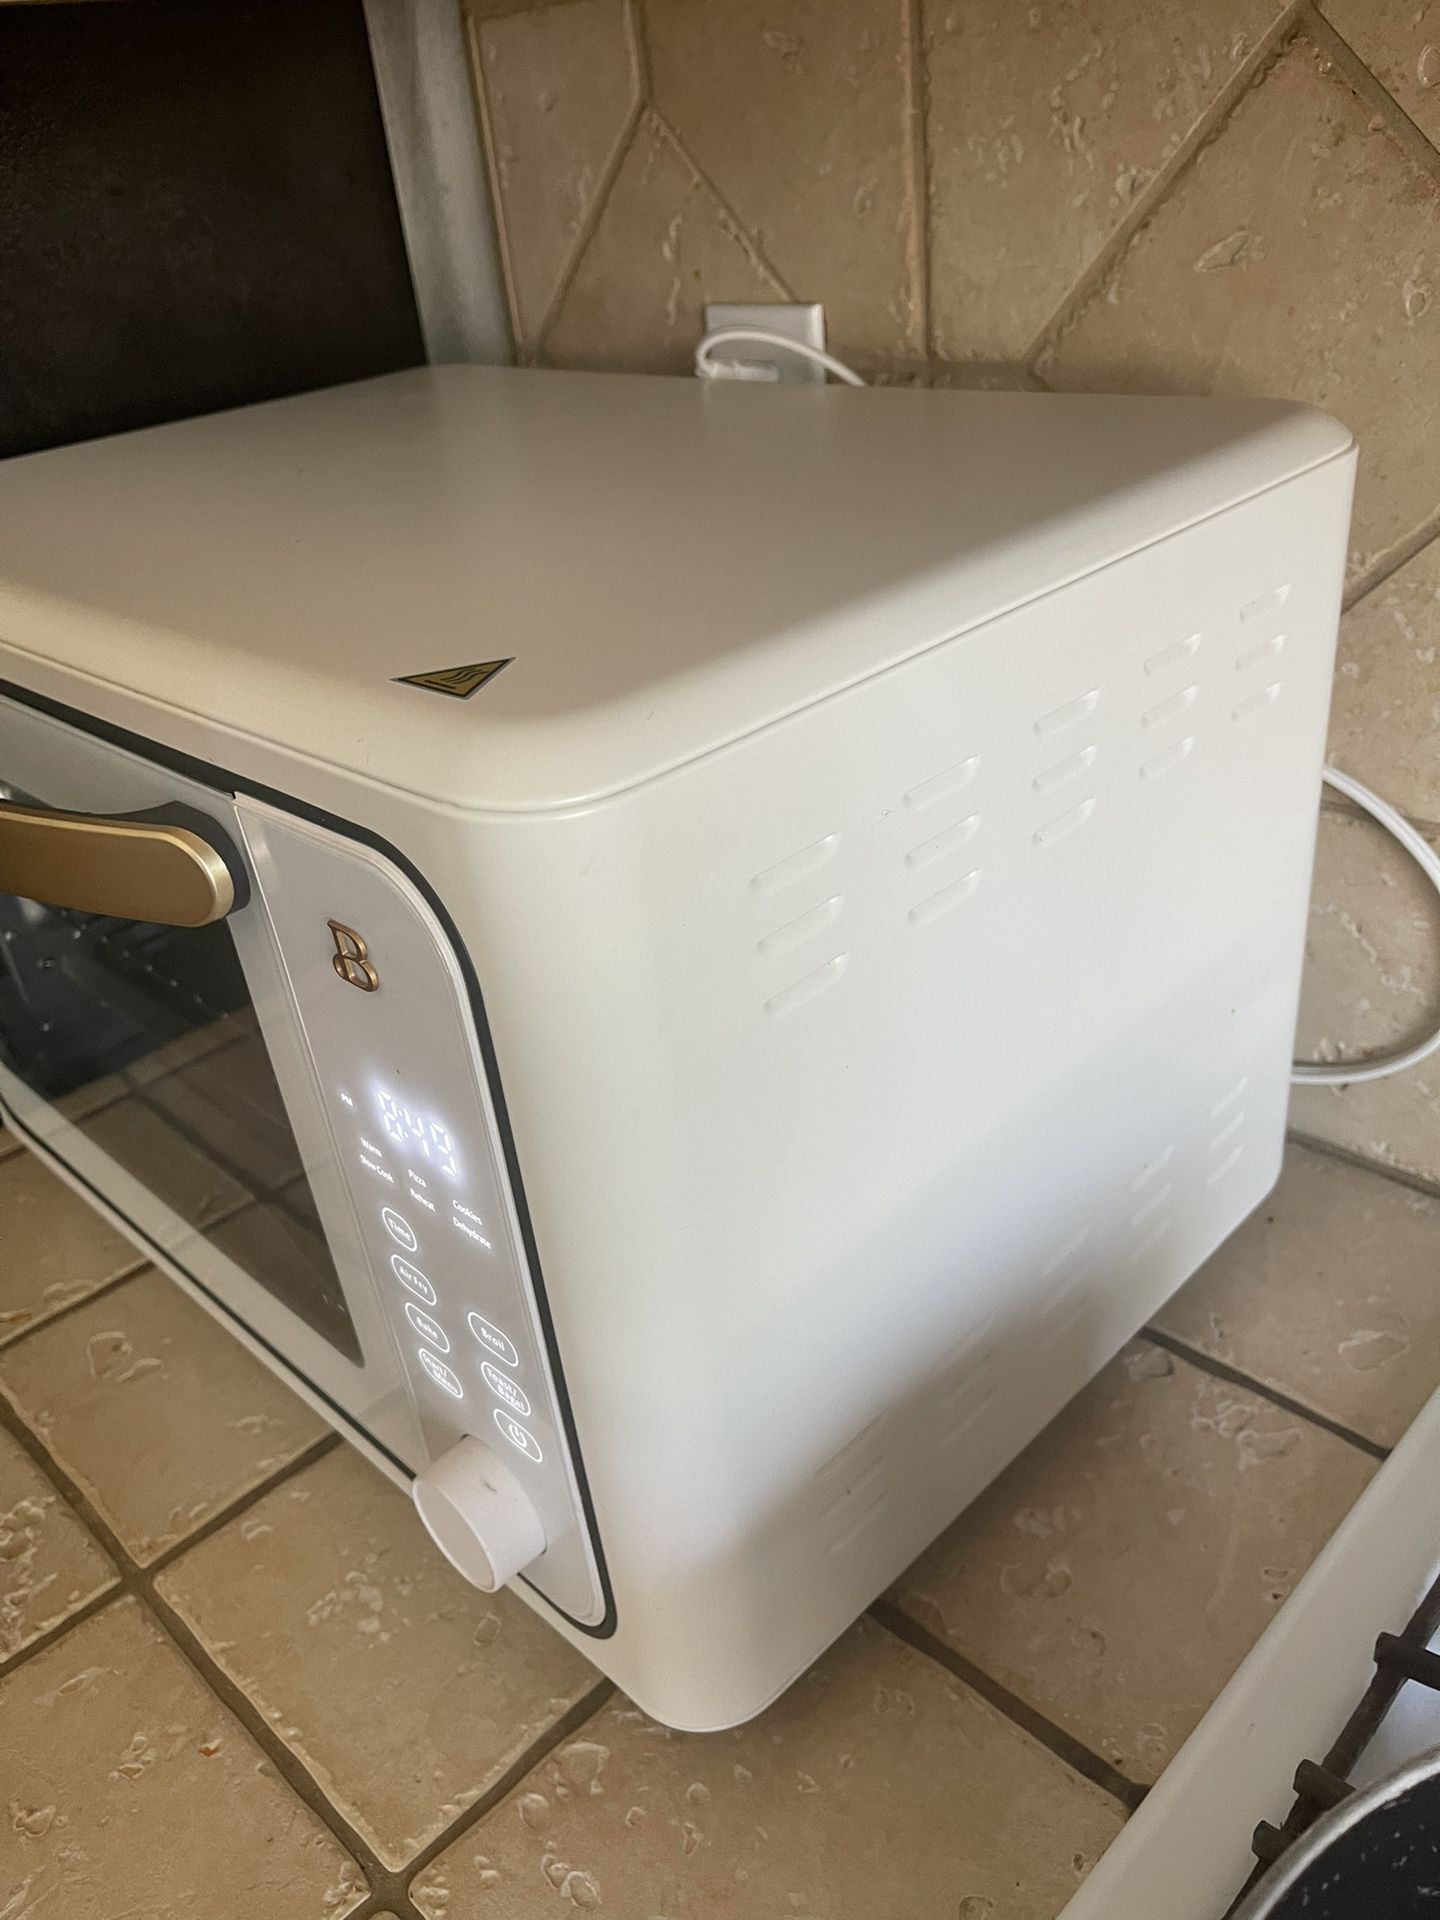 Farberware Air Fryer Toaster Oven for Sale in Winchester, CA - OfferUp